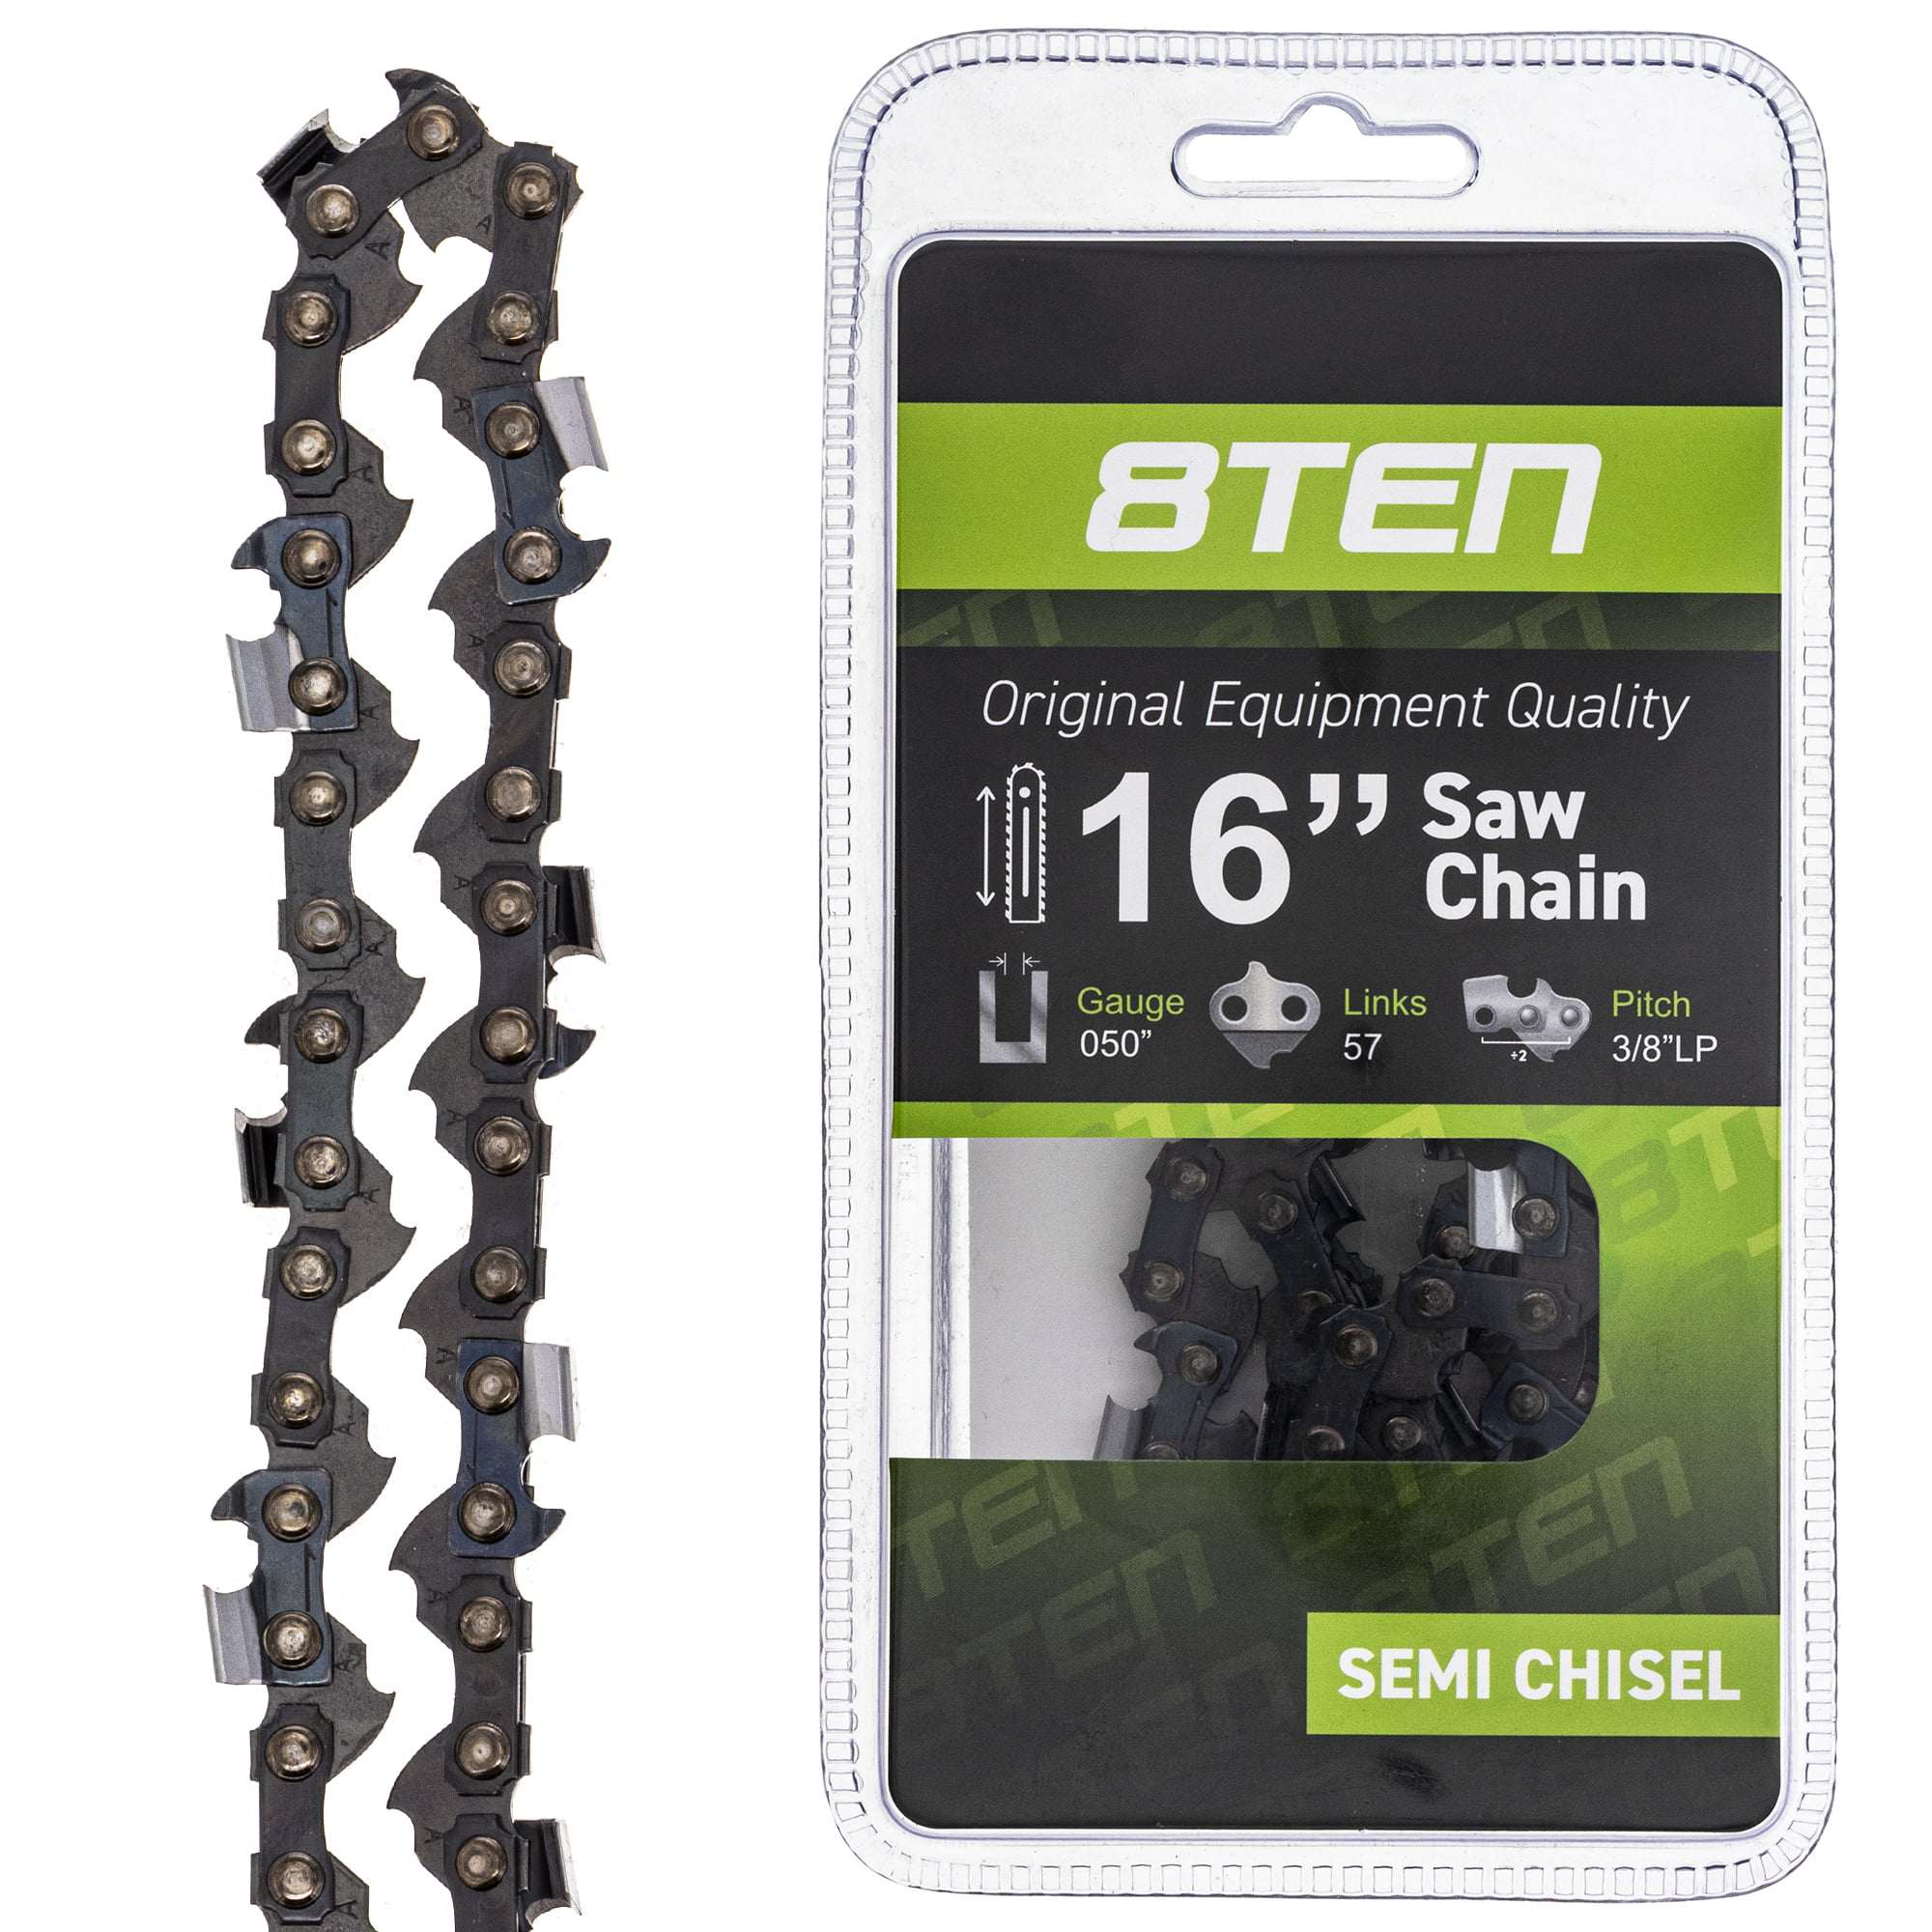 Chainsaw Chain Blade Replacement 16''inch 57 Links 3/8''LP .050 Gauge56DL steel 